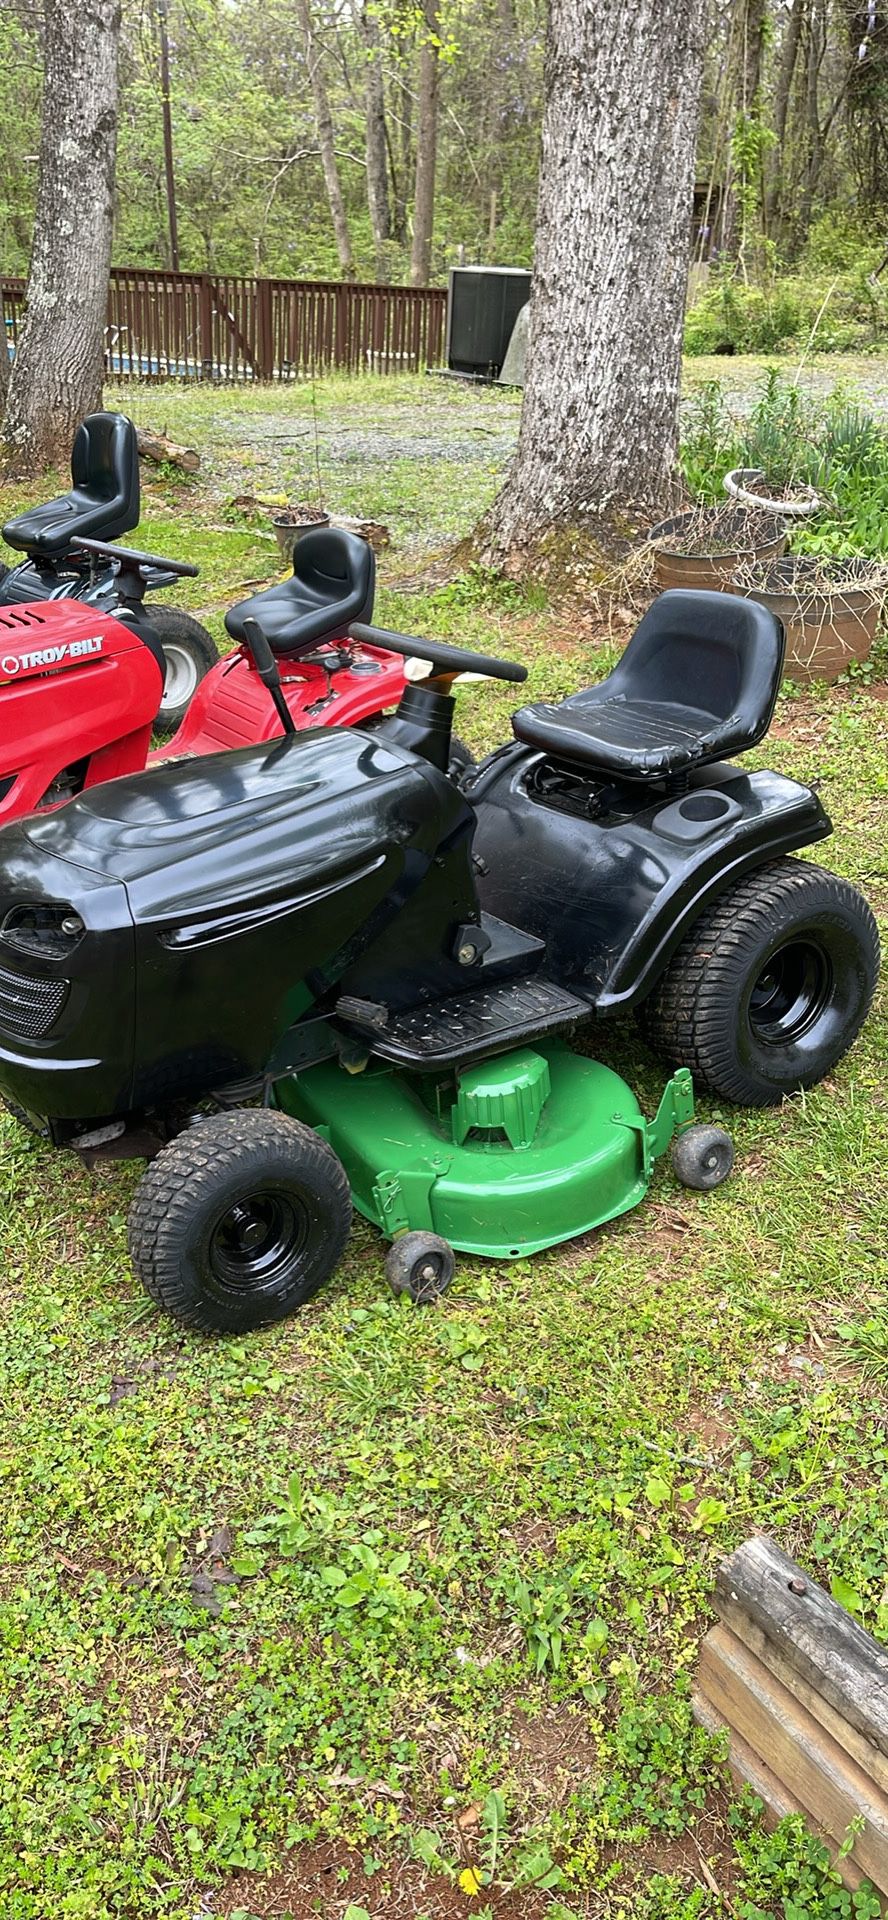 Riding Mowers,  Riding Lawn Mowers, All Serviced, $650 And Up